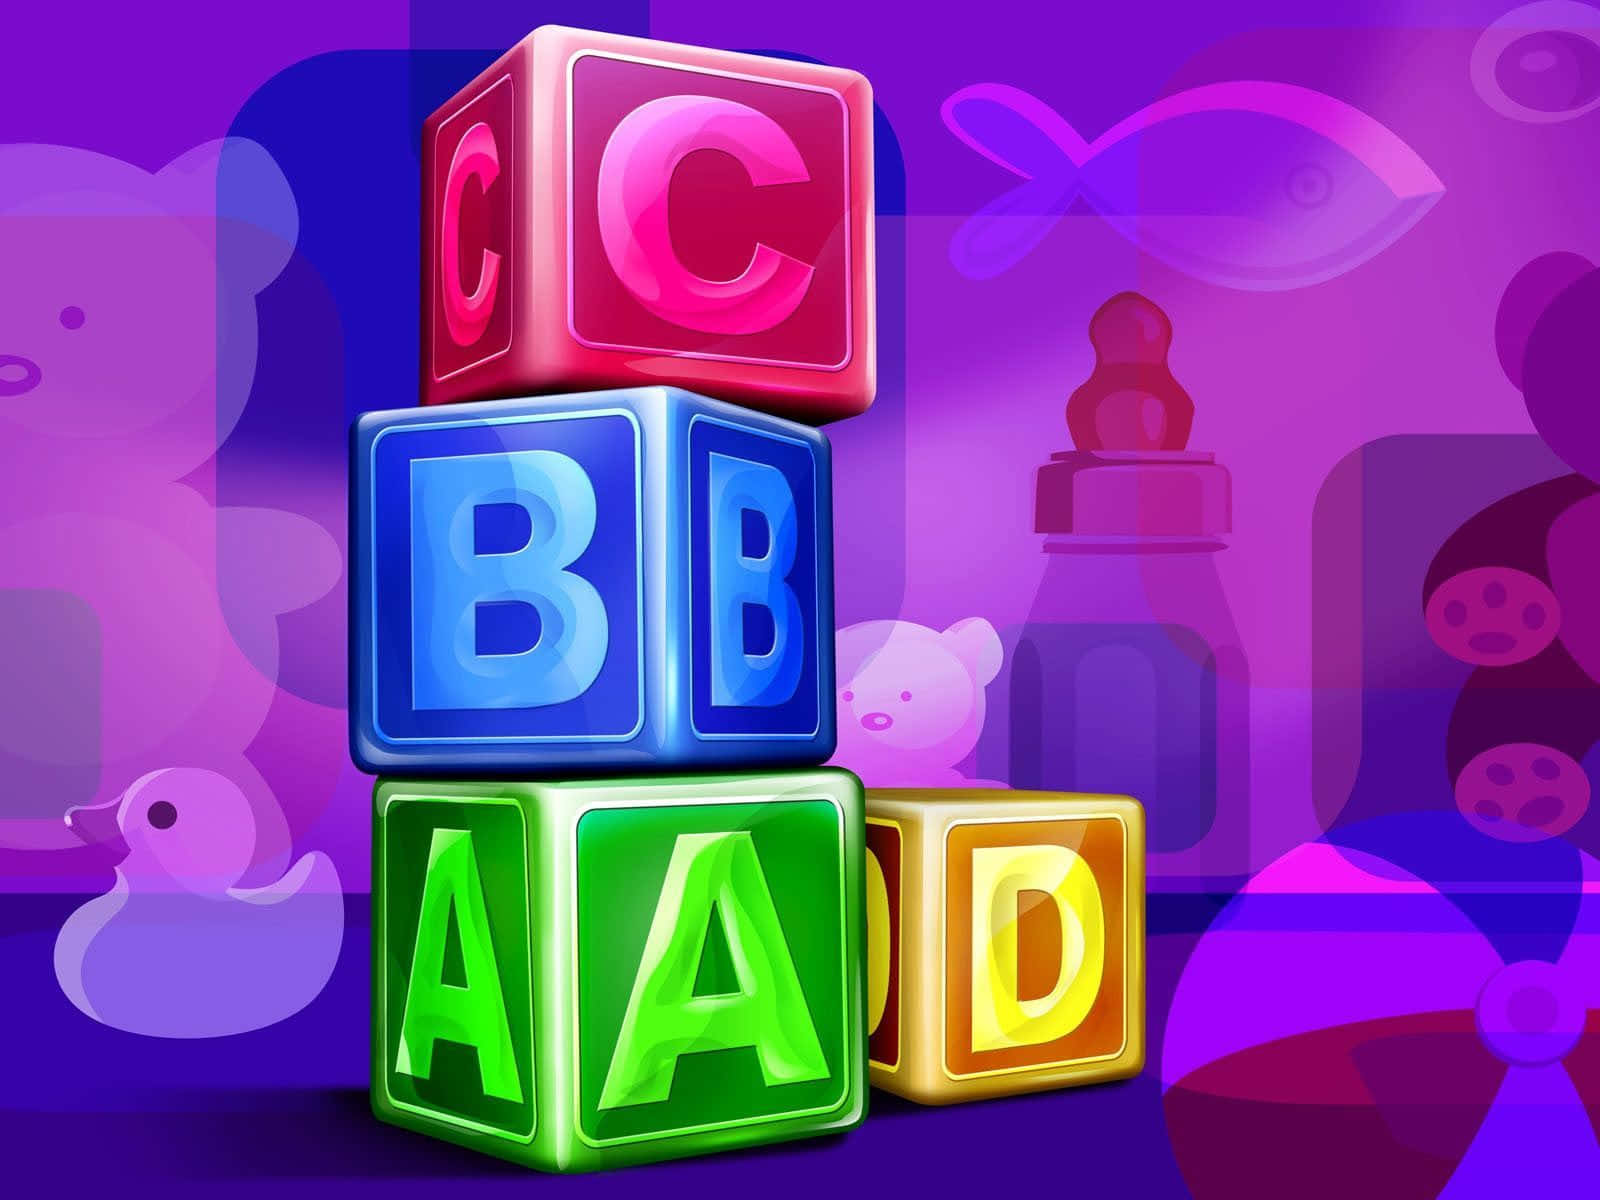 Vibrant ABC Letters on Colorful Background